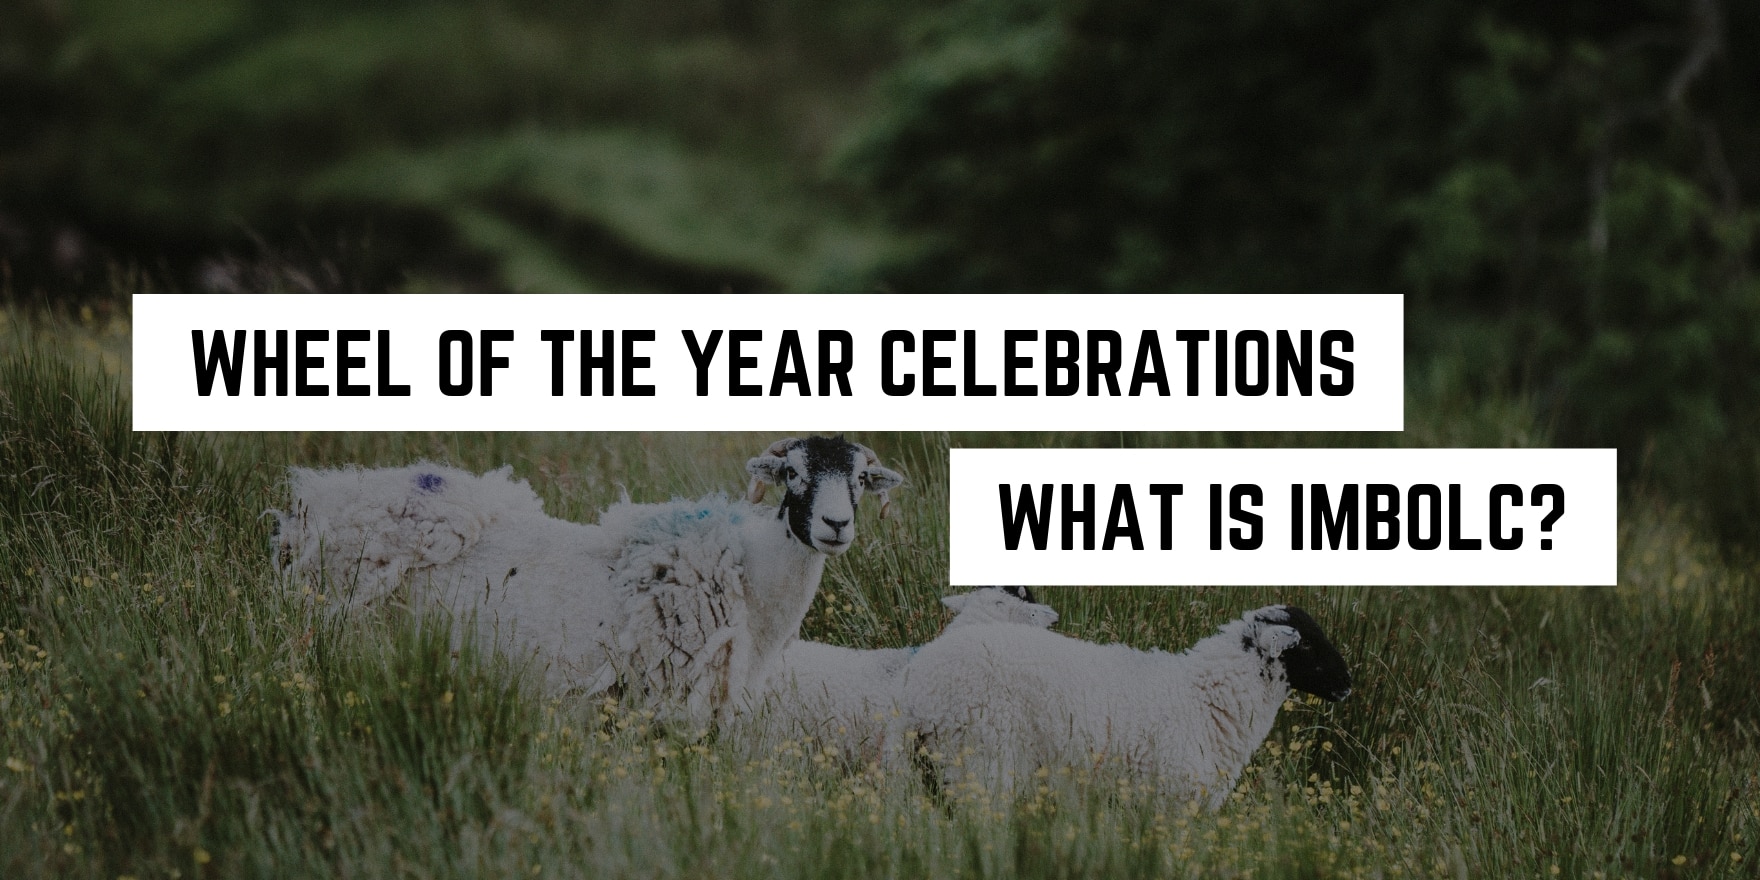 Flock of sheep grazing in a field with a caption about Imbolc, one of the Wheel of the Year celebrations, highlighting its metaphysical significance.